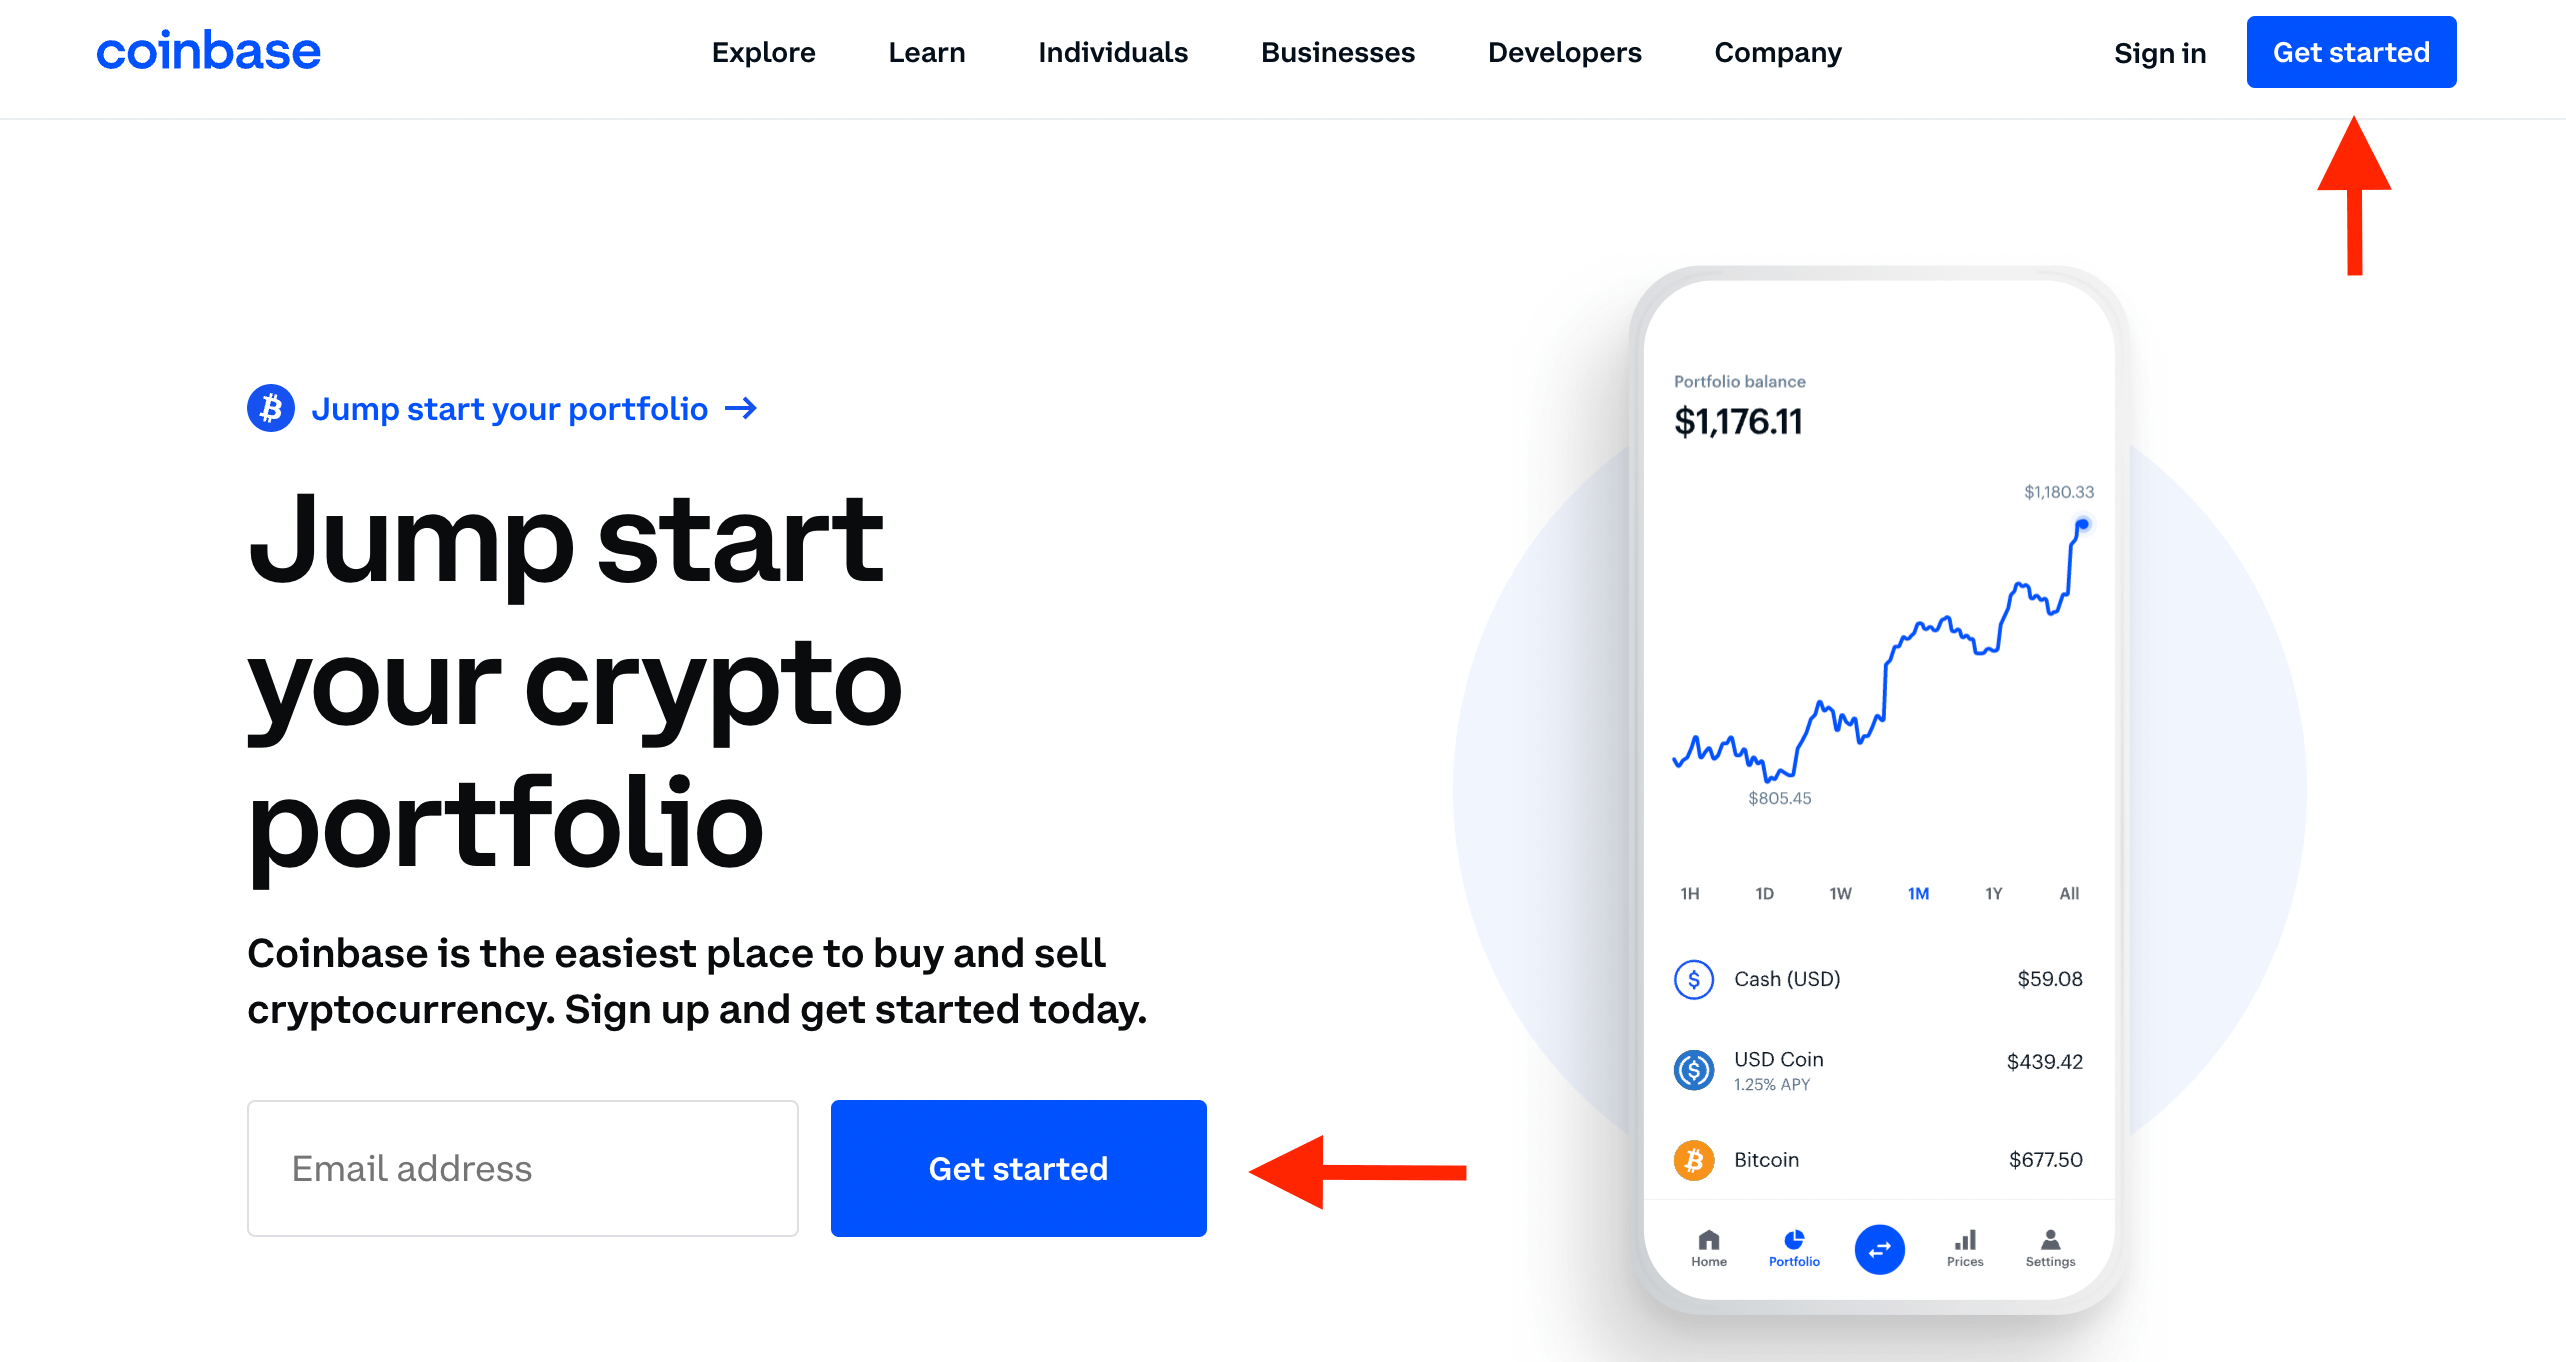 Account opening on Coinbase